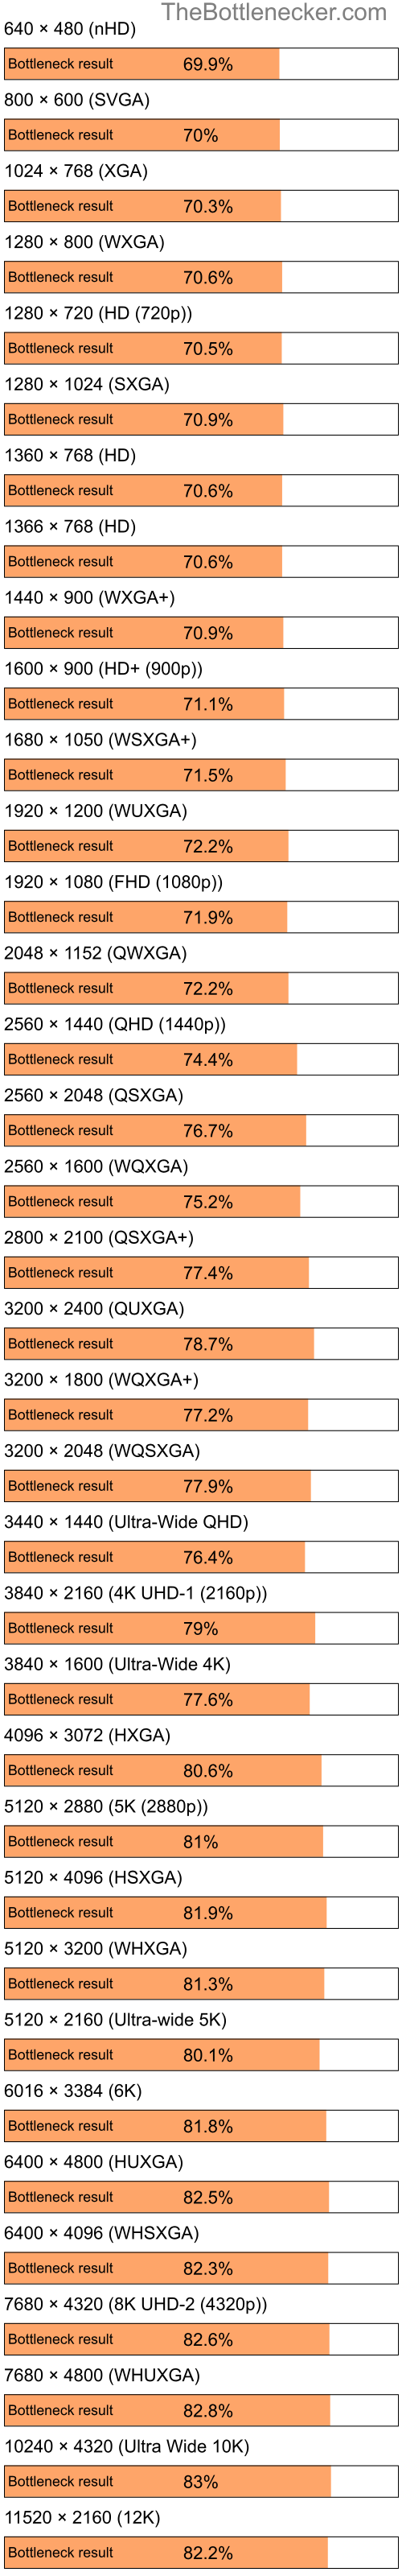 Bottleneck results by resolution for Intel Pentium 4 and NVIDIA GeForce FX 5900XT in Processor Intense Tasks